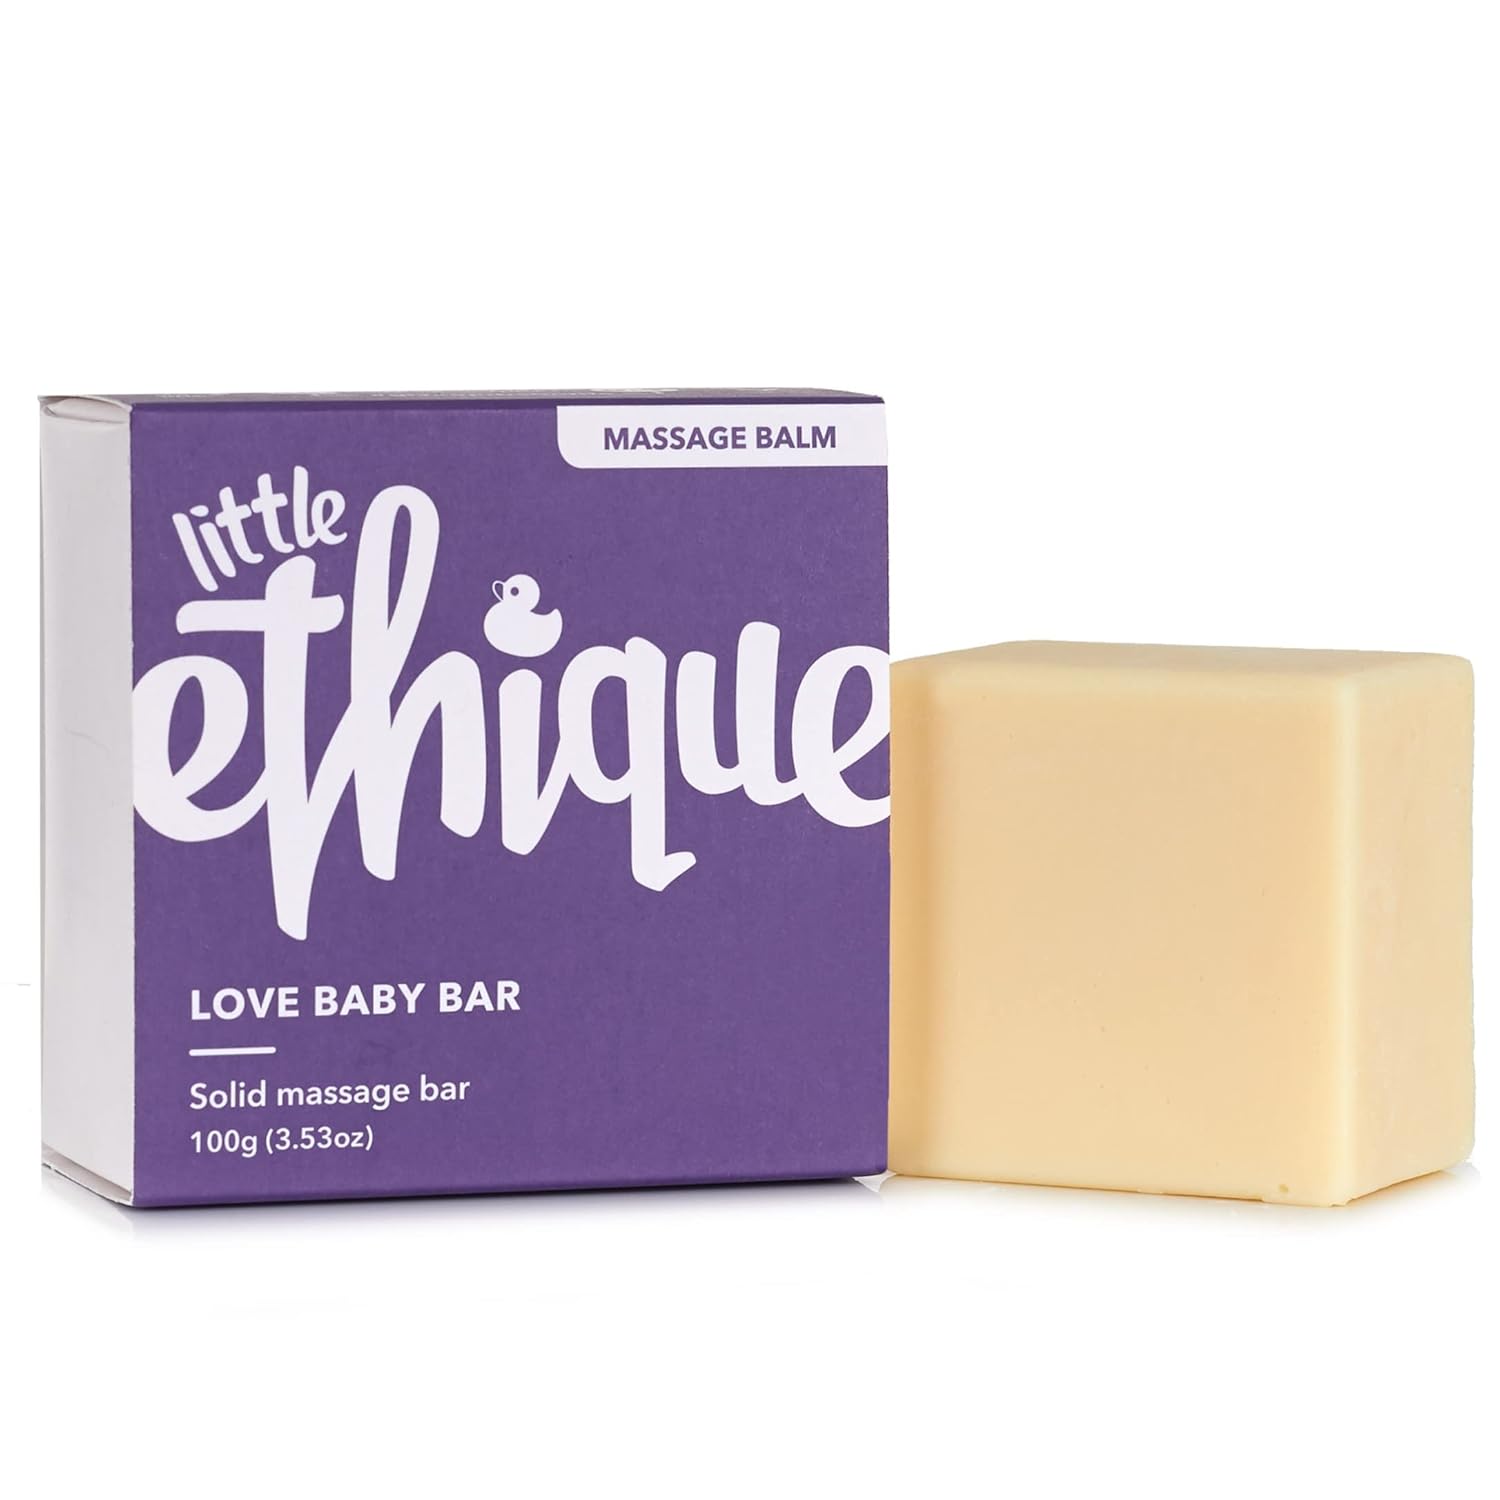 Ethique Love Baby Bar Solid Massage Bar to Prevent Dry Skin - Plastic-Free, Vegan, Cruelty-Free, Eco-Friendly, 3.53 oz (Pack of 1)